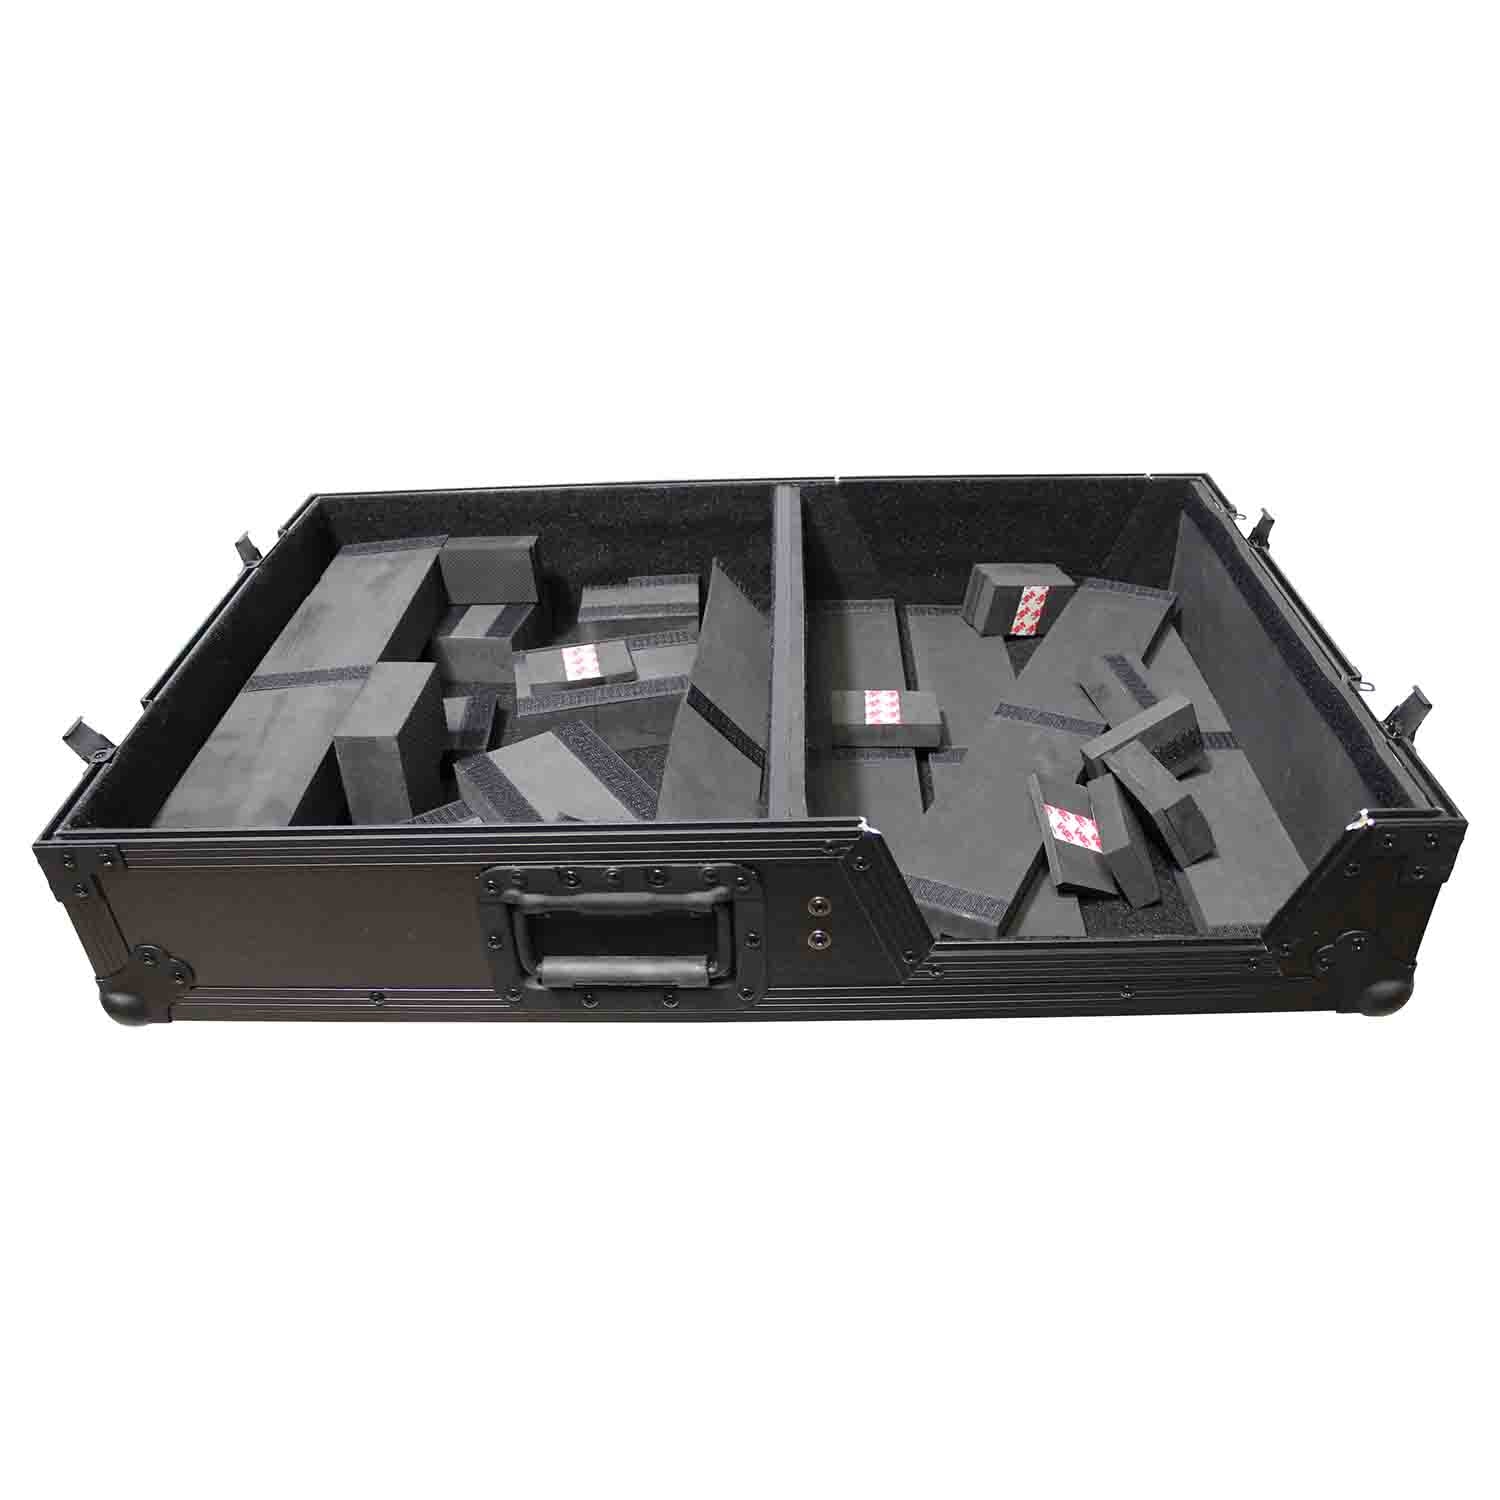 ProX XS-TMC1012WBL DJ Flight Case For Single Turntable In Battle Mode and 10 Inch or 12 Inch Mixer - Black on Black ProX Cases